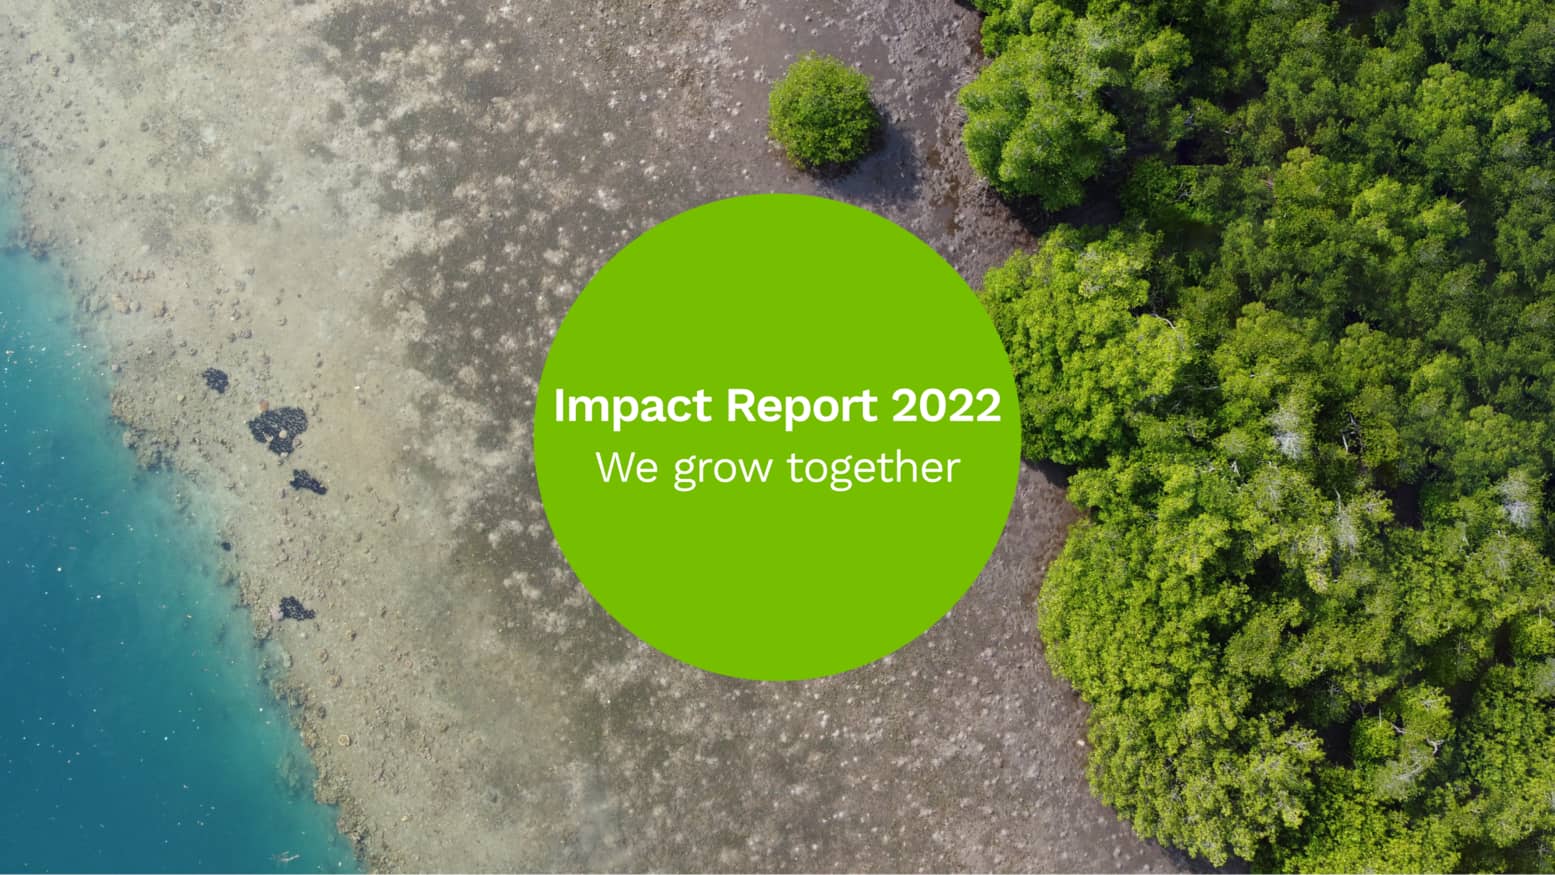 Our Impact Report: We grow together